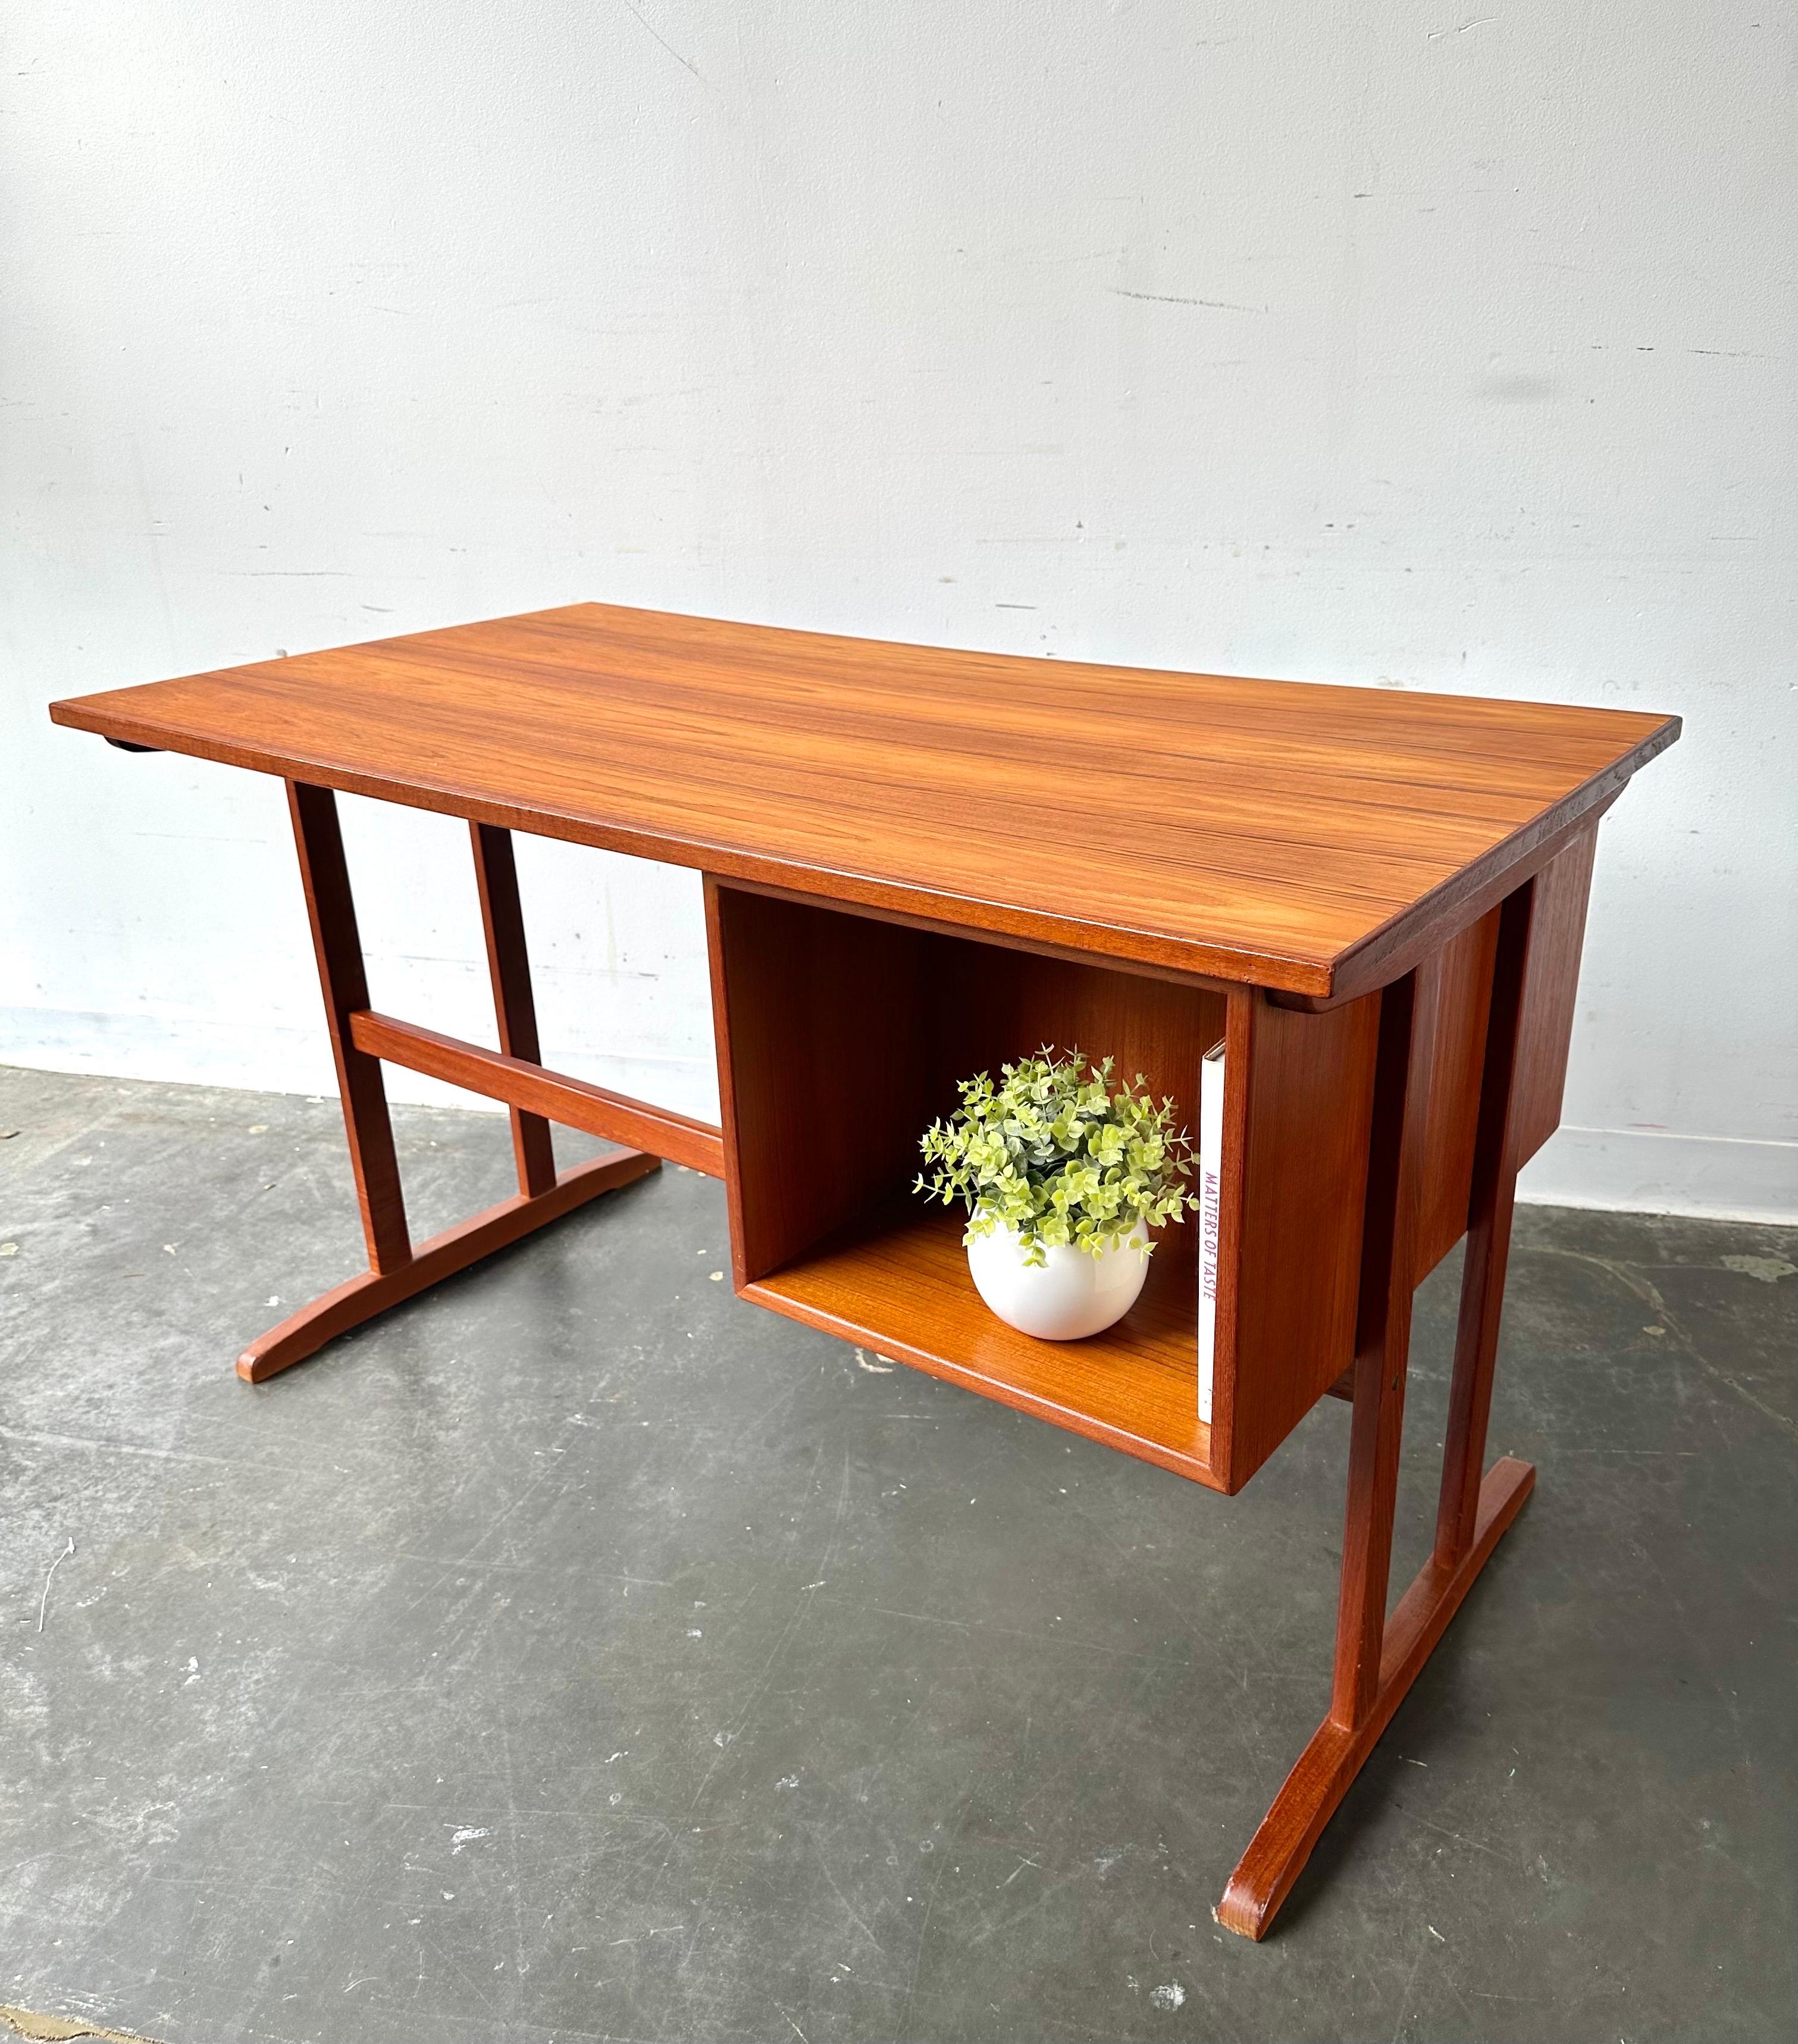 Danish teak desk with open bookcase back in the style of Arne Vodder.

Gorgeous Scandinavian teak floating desk with a freshly refinished top.

Very functional open back design with a cubby for storage of books, etc.  